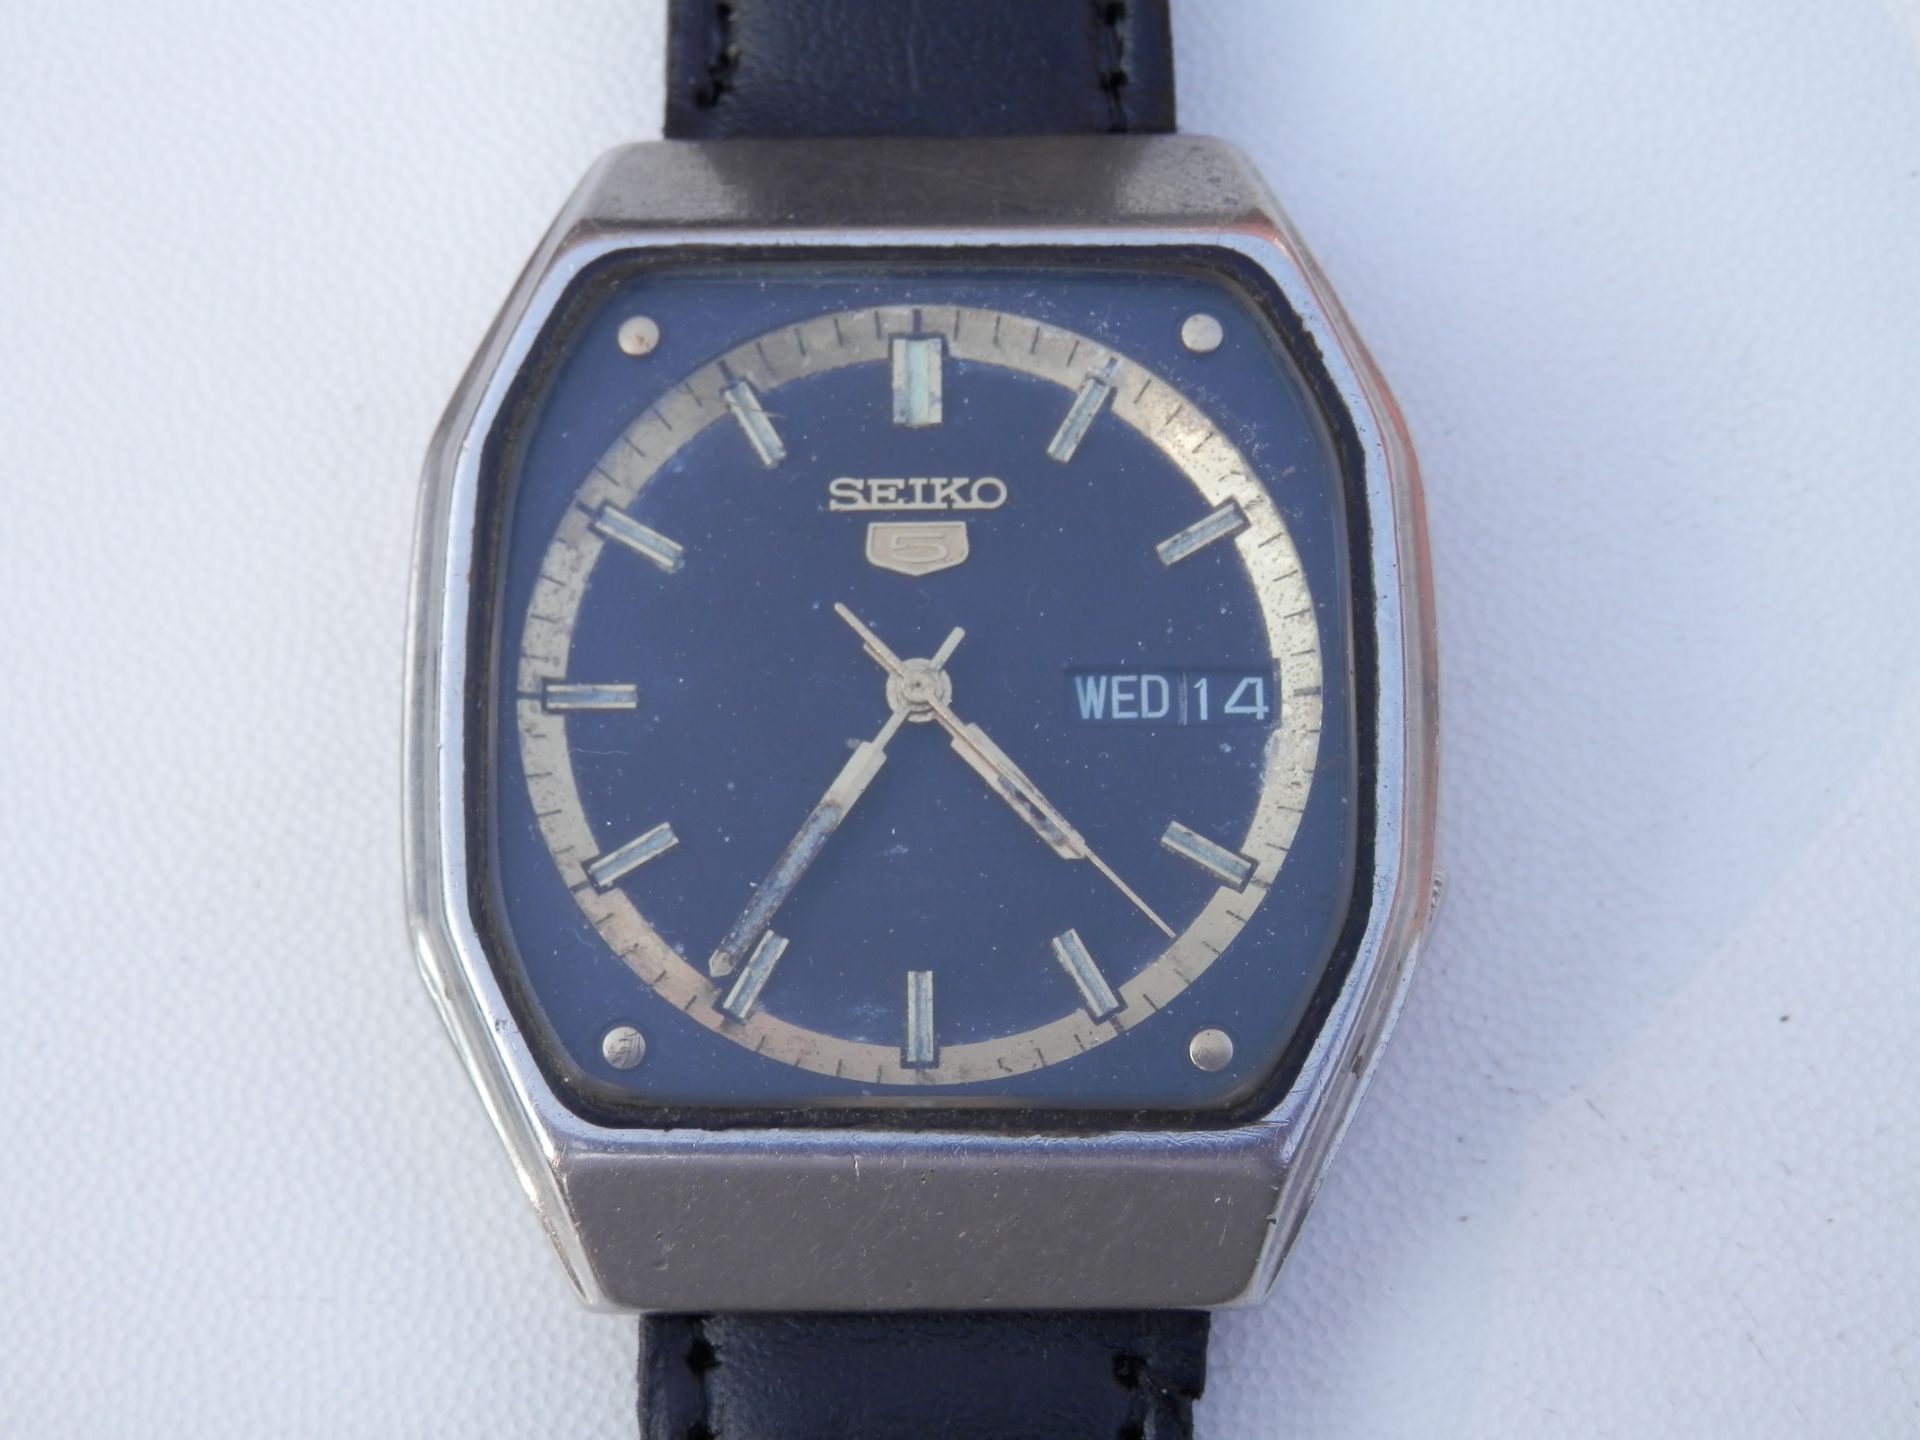 1981 SEIKO 5 AUTOMATIC DAY & DATE JEWELLED WATCH, BLACK & GOLD DIAL, RARE WORKING WATCH - Image 6 of 11